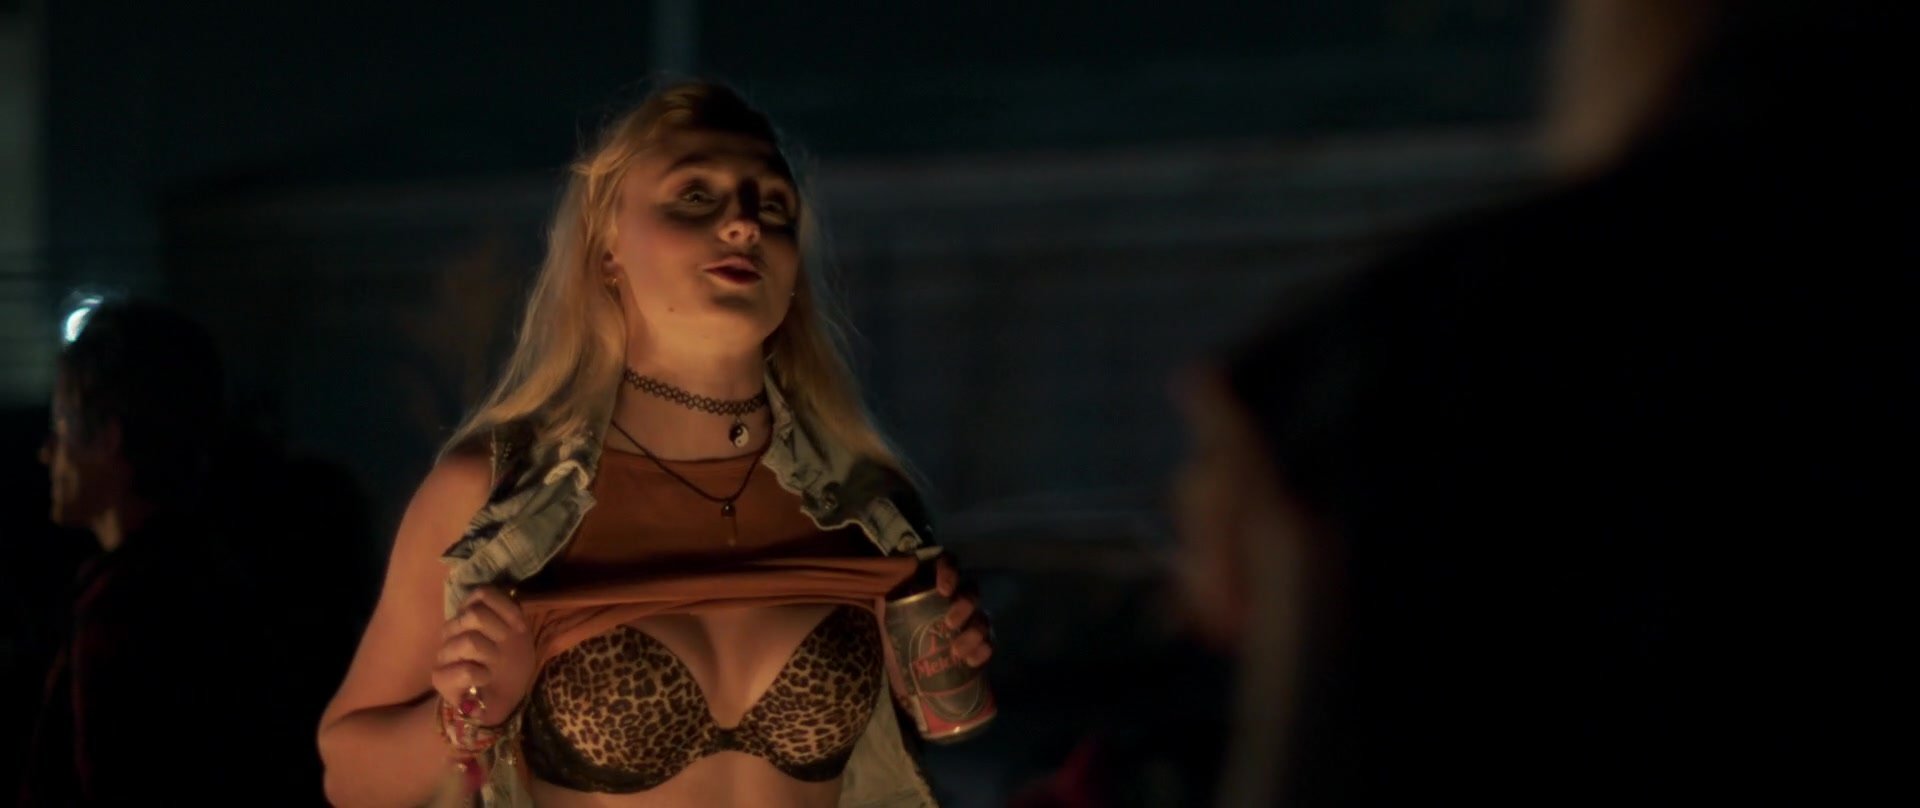 Sophie Turner Sexy Josie 2018 1080p 55 Pics S And Video Thefappening